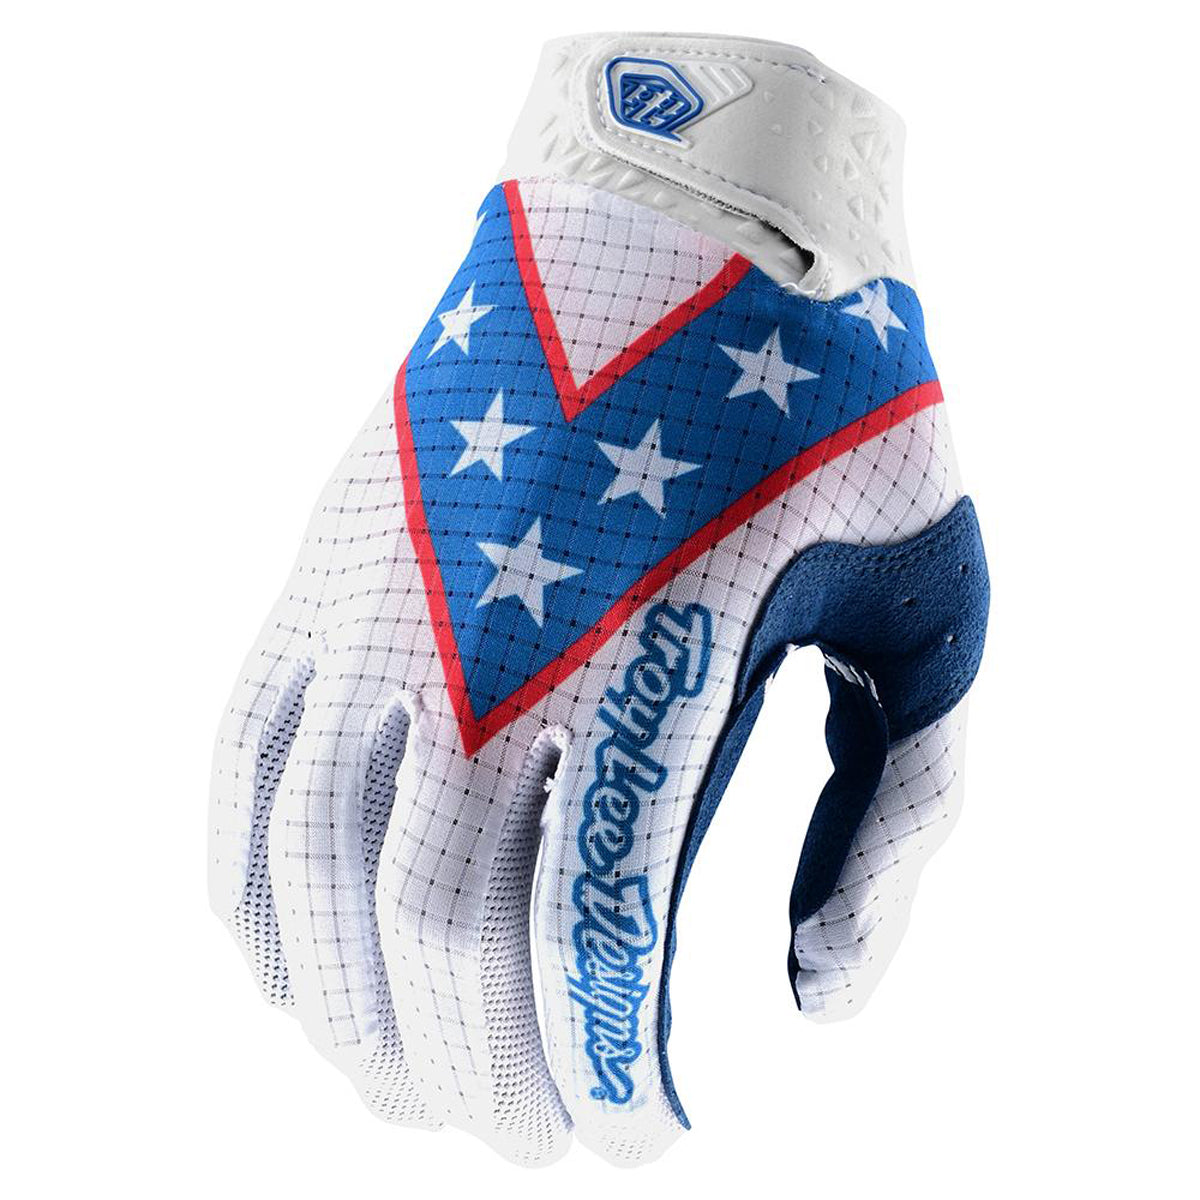 Troy Lee Designs Air Glove - Evel Kneivel Limited Edition - White/Blue